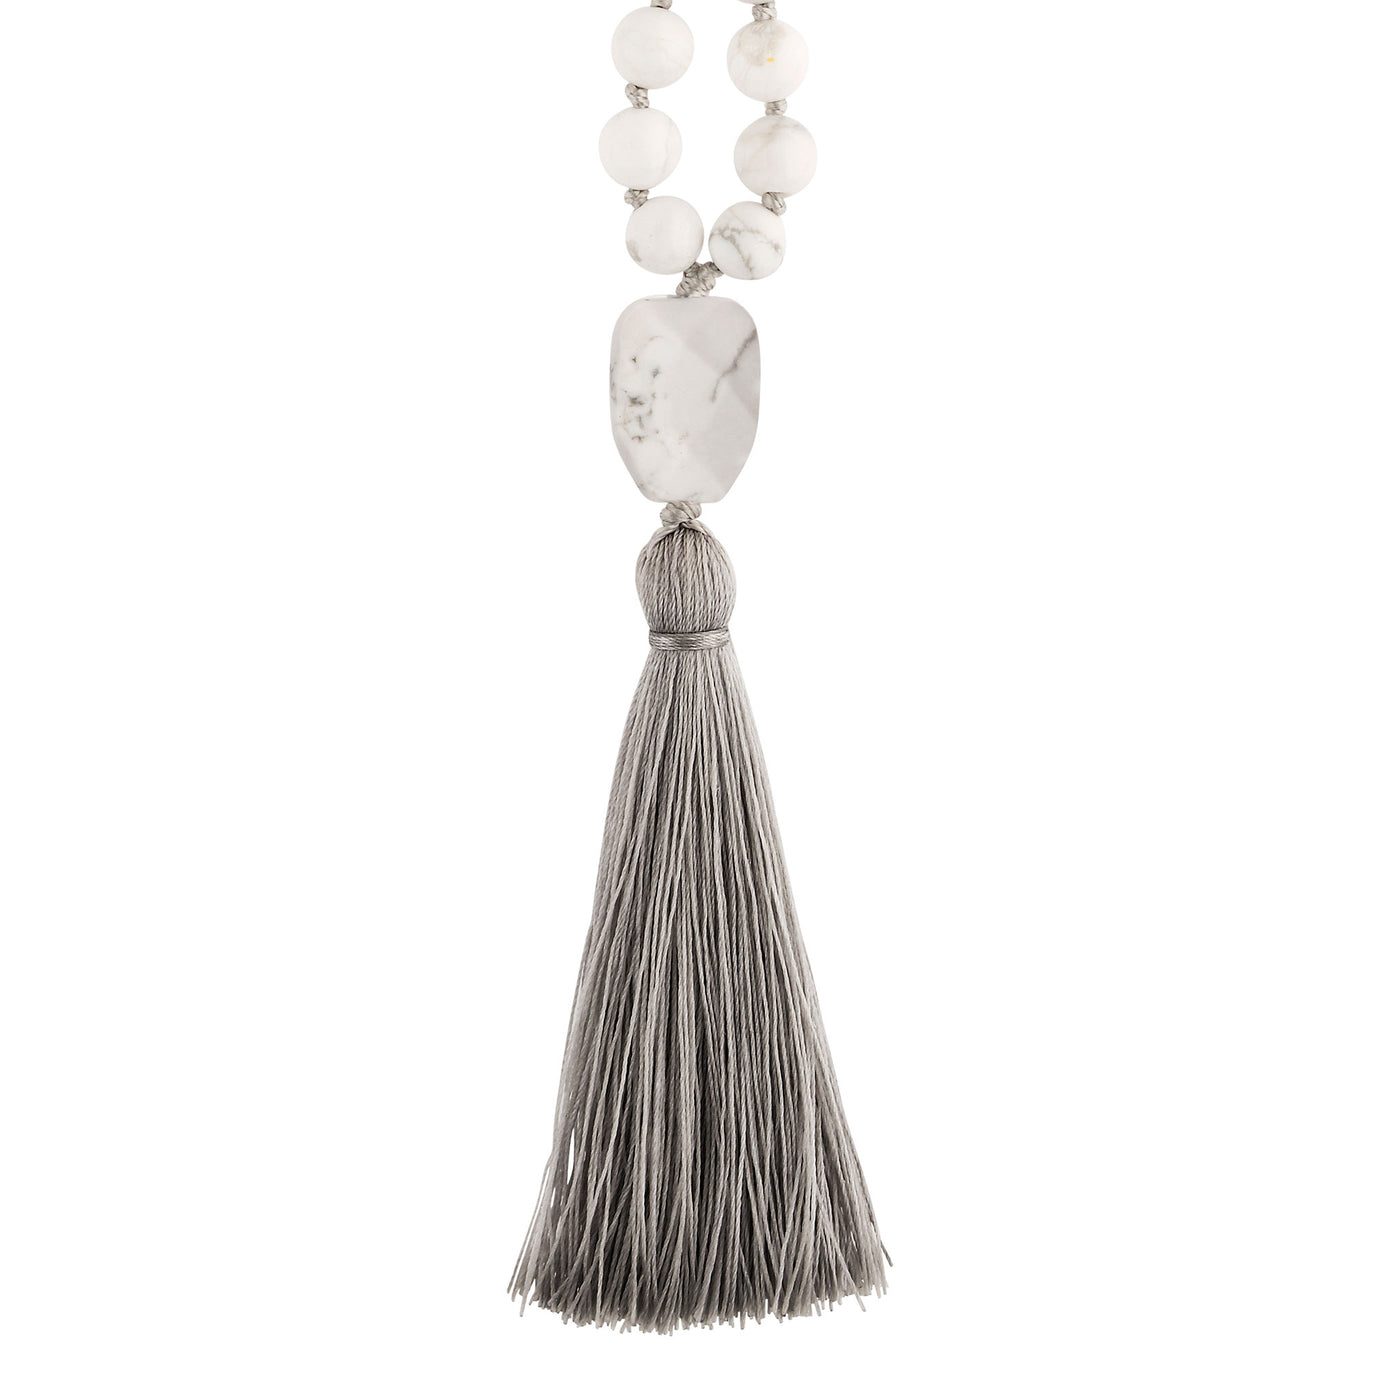 PATIENCE: White Howlite Calming Stone 108 Bead Hand-knotted Mala Necklace (6mm)